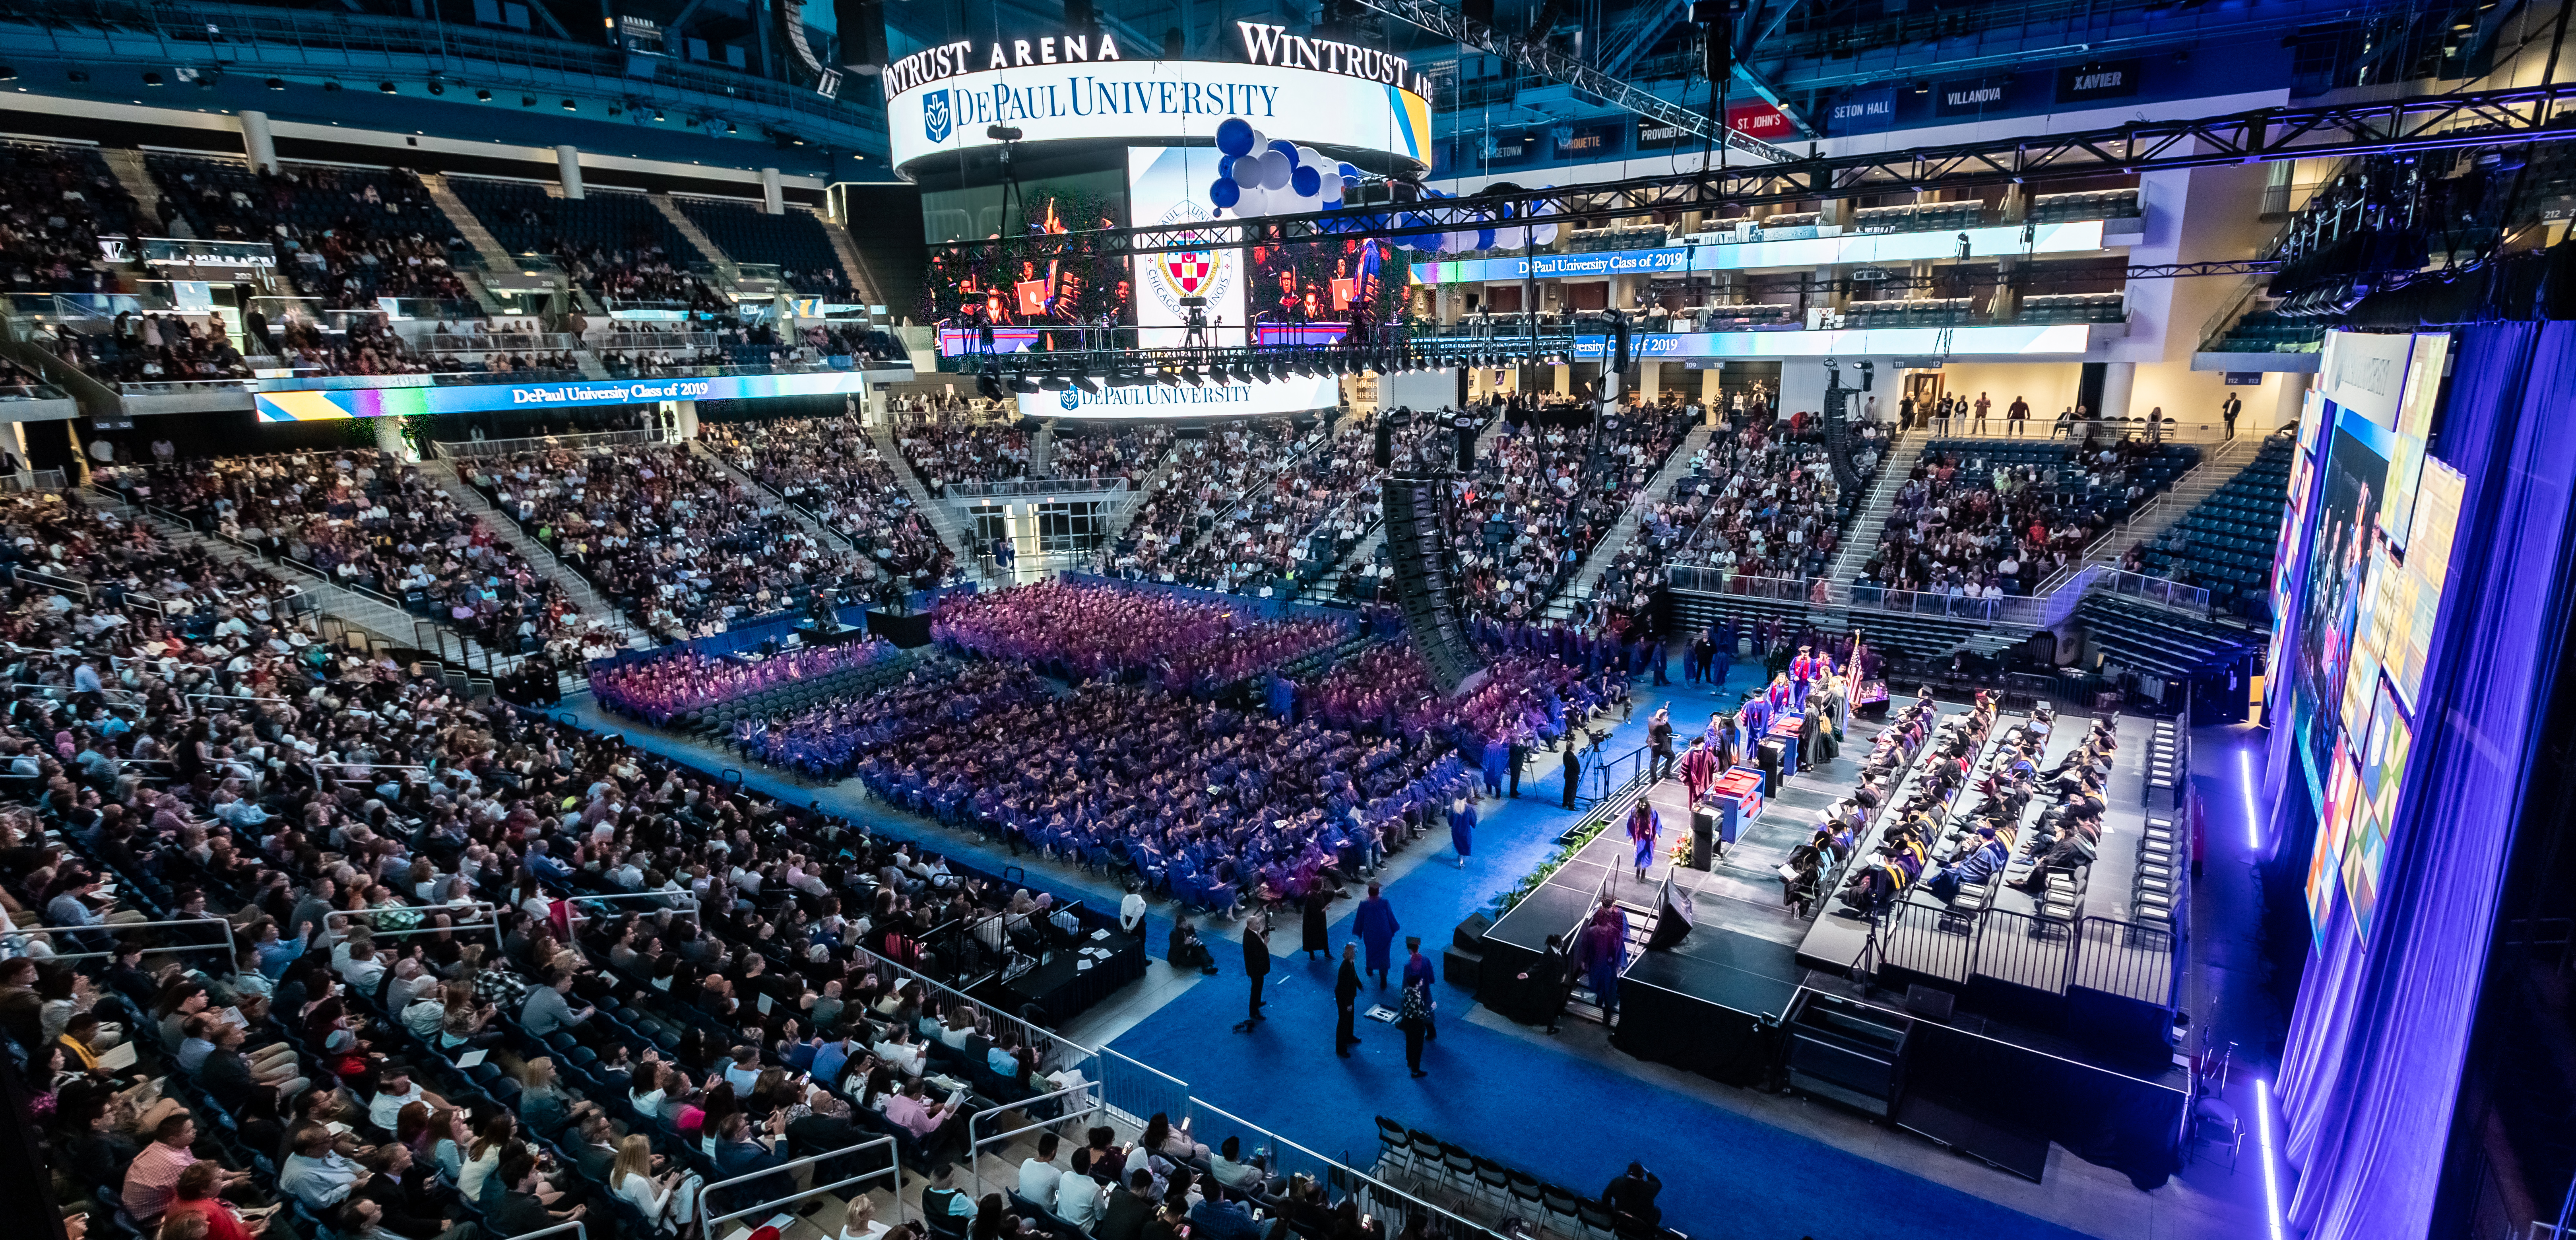 Depaul University Calendar 2022 Depaul Announces In-Person Commencement Schedule For Class Of 2022 | Campus  And Community | Sections | Depaul University Newsline | Depaul University,  Chicago